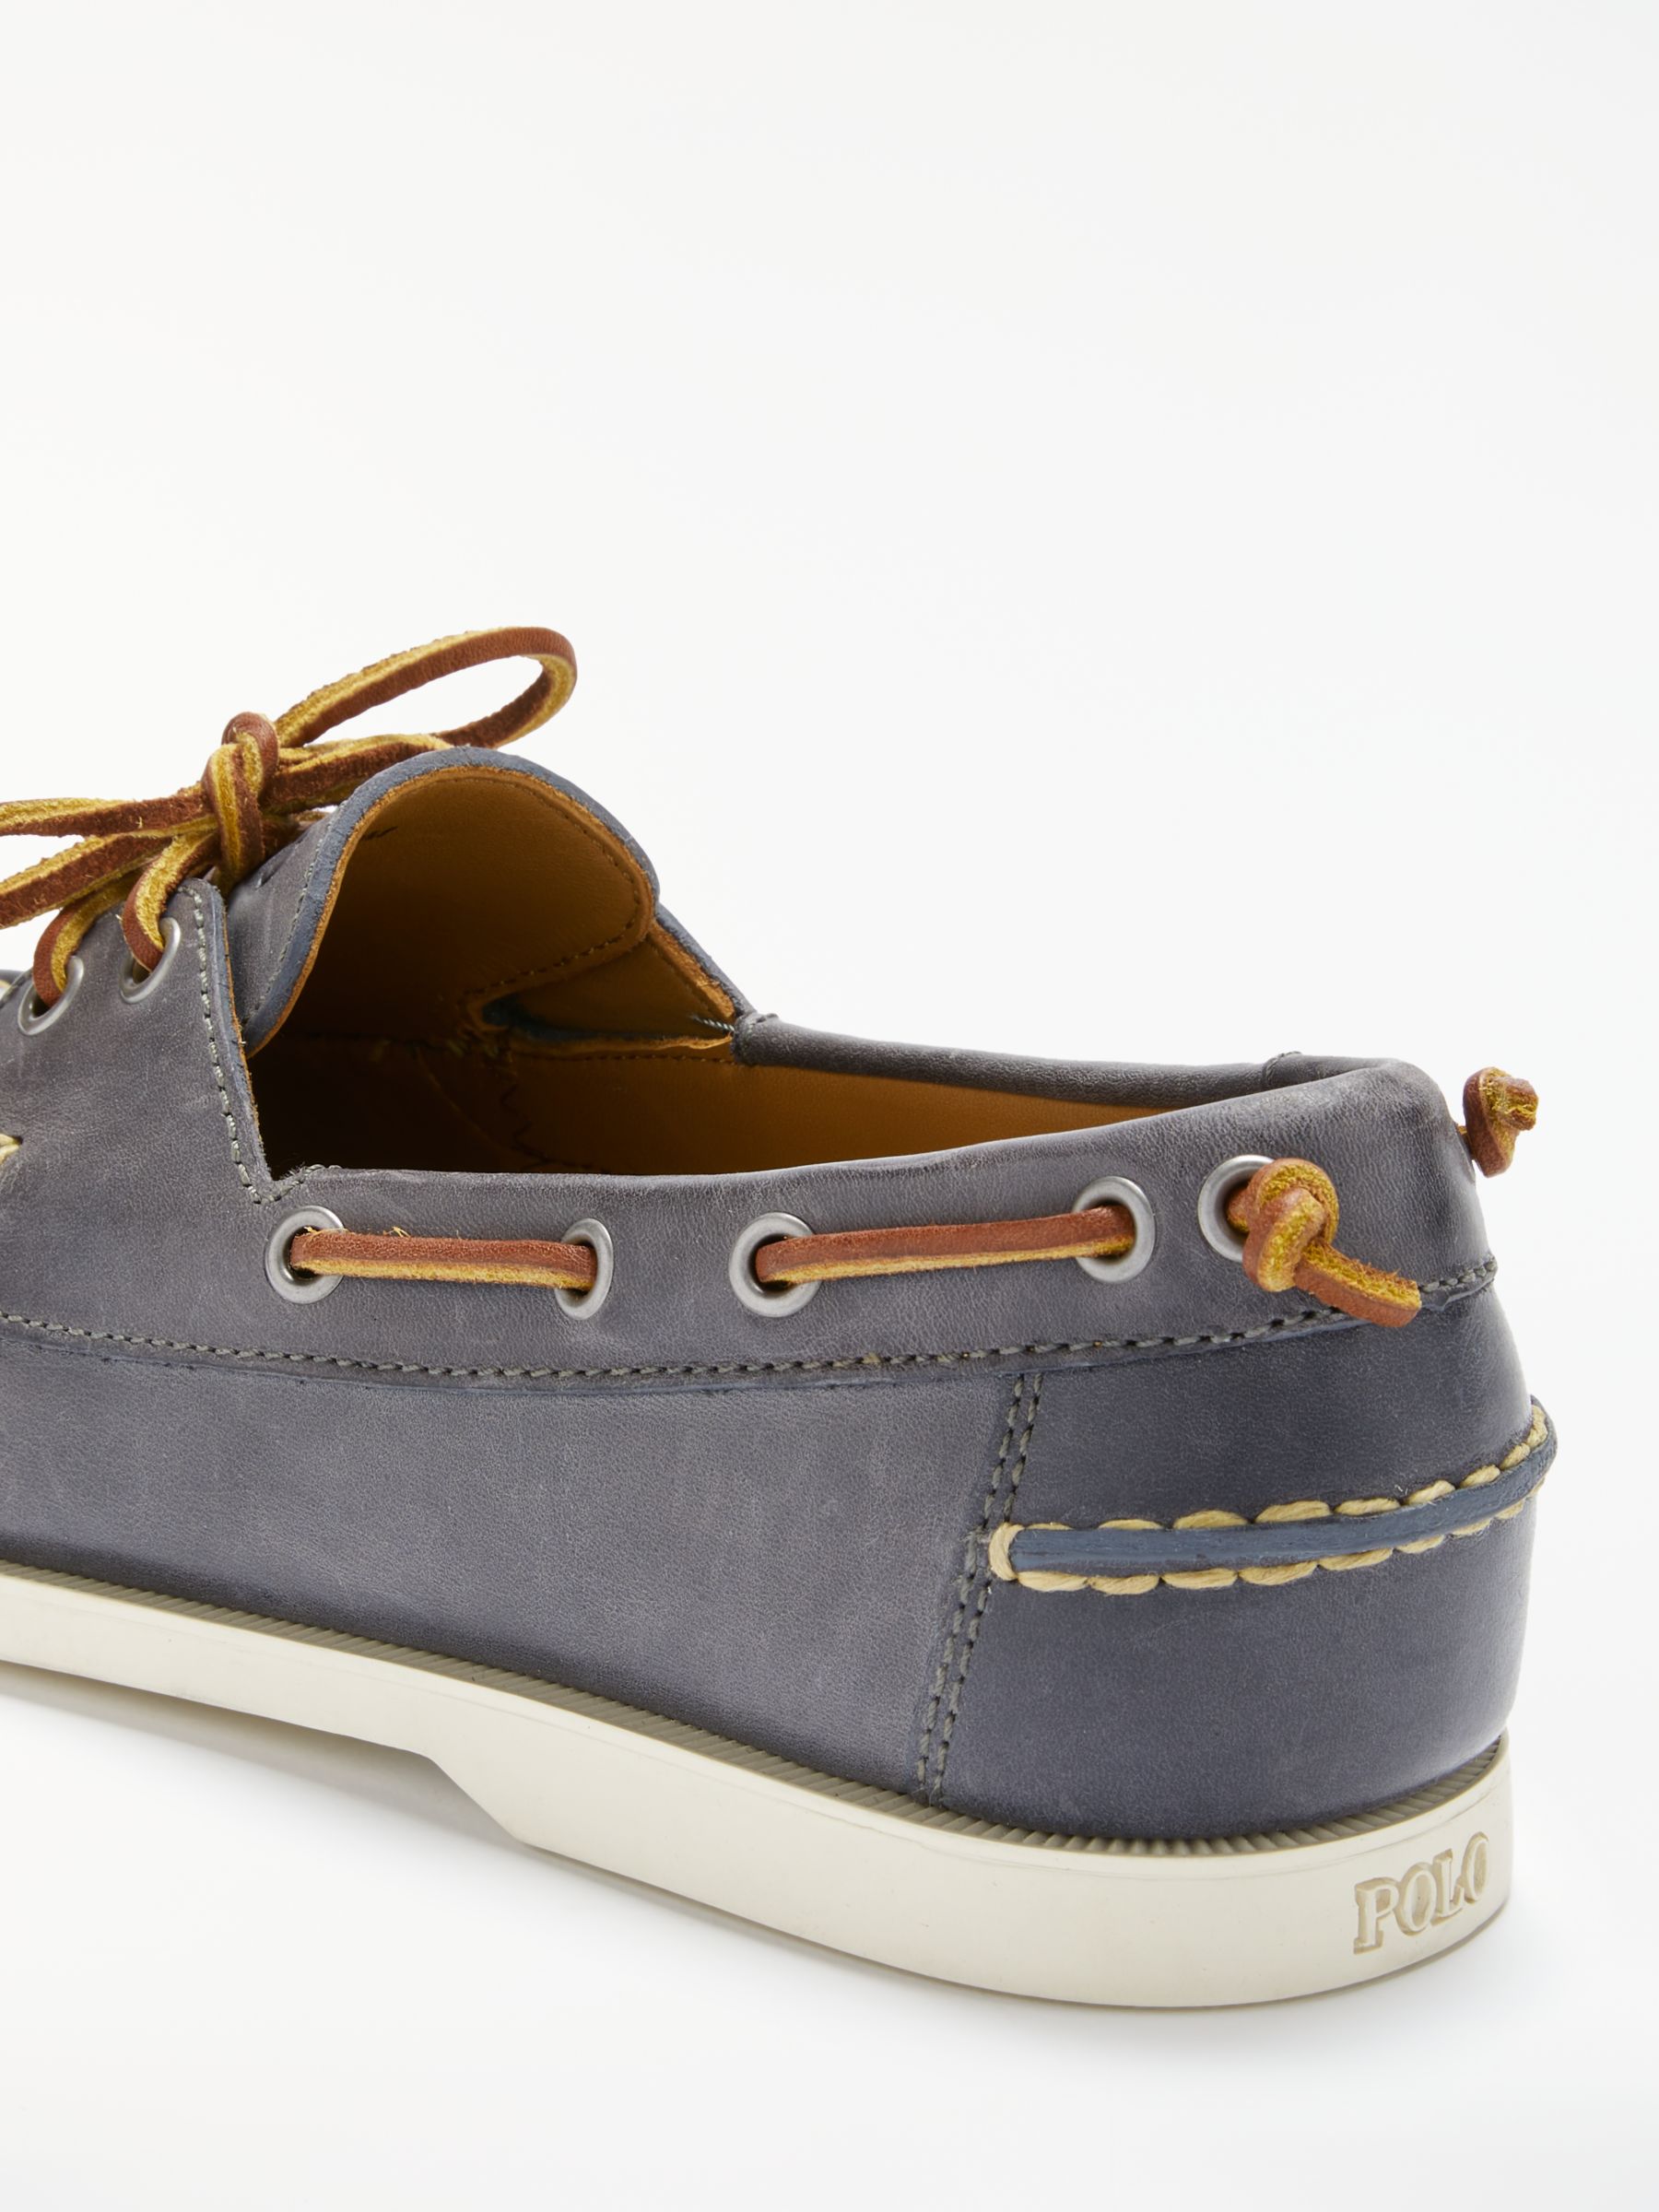 blue polo boat shoes